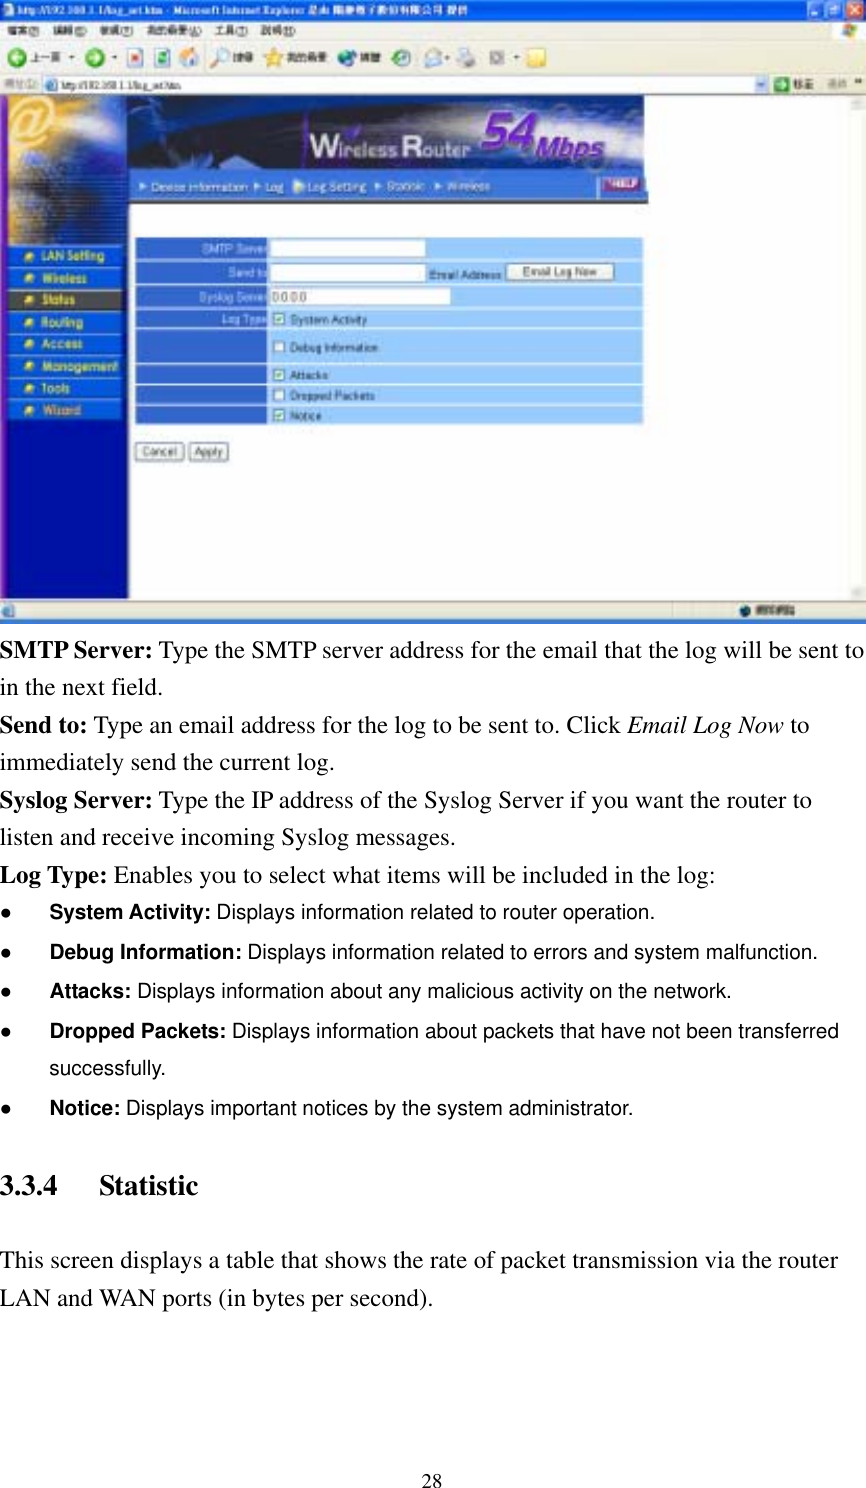  28 SMTP Server: Type the SMTP server address for the email that the log will be sent to in the next field. Send to: Type an email address for the log to be sent to. Click Email Log Now to immediately send the current log. Syslog Server: Type the IP address of the Syslog Server if you want the router to listen and receive incoming Syslog messages. Log Type: Enables you to select what items will be included in the log: ● System Activity: Displays information related to router operation. ● Debug Information: Displays information related to errors and system malfunction. ● Attacks: Displays information about any malicious activity on the network. ● Dropped Packets: Displays information about packets that have not been transferred successfully. ● Notice: Displays important notices by the system administrator. 3.3.4 Statistic This screen displays a table that shows the rate of packet transmission via the router LAN and WAN ports (in bytes per second). 